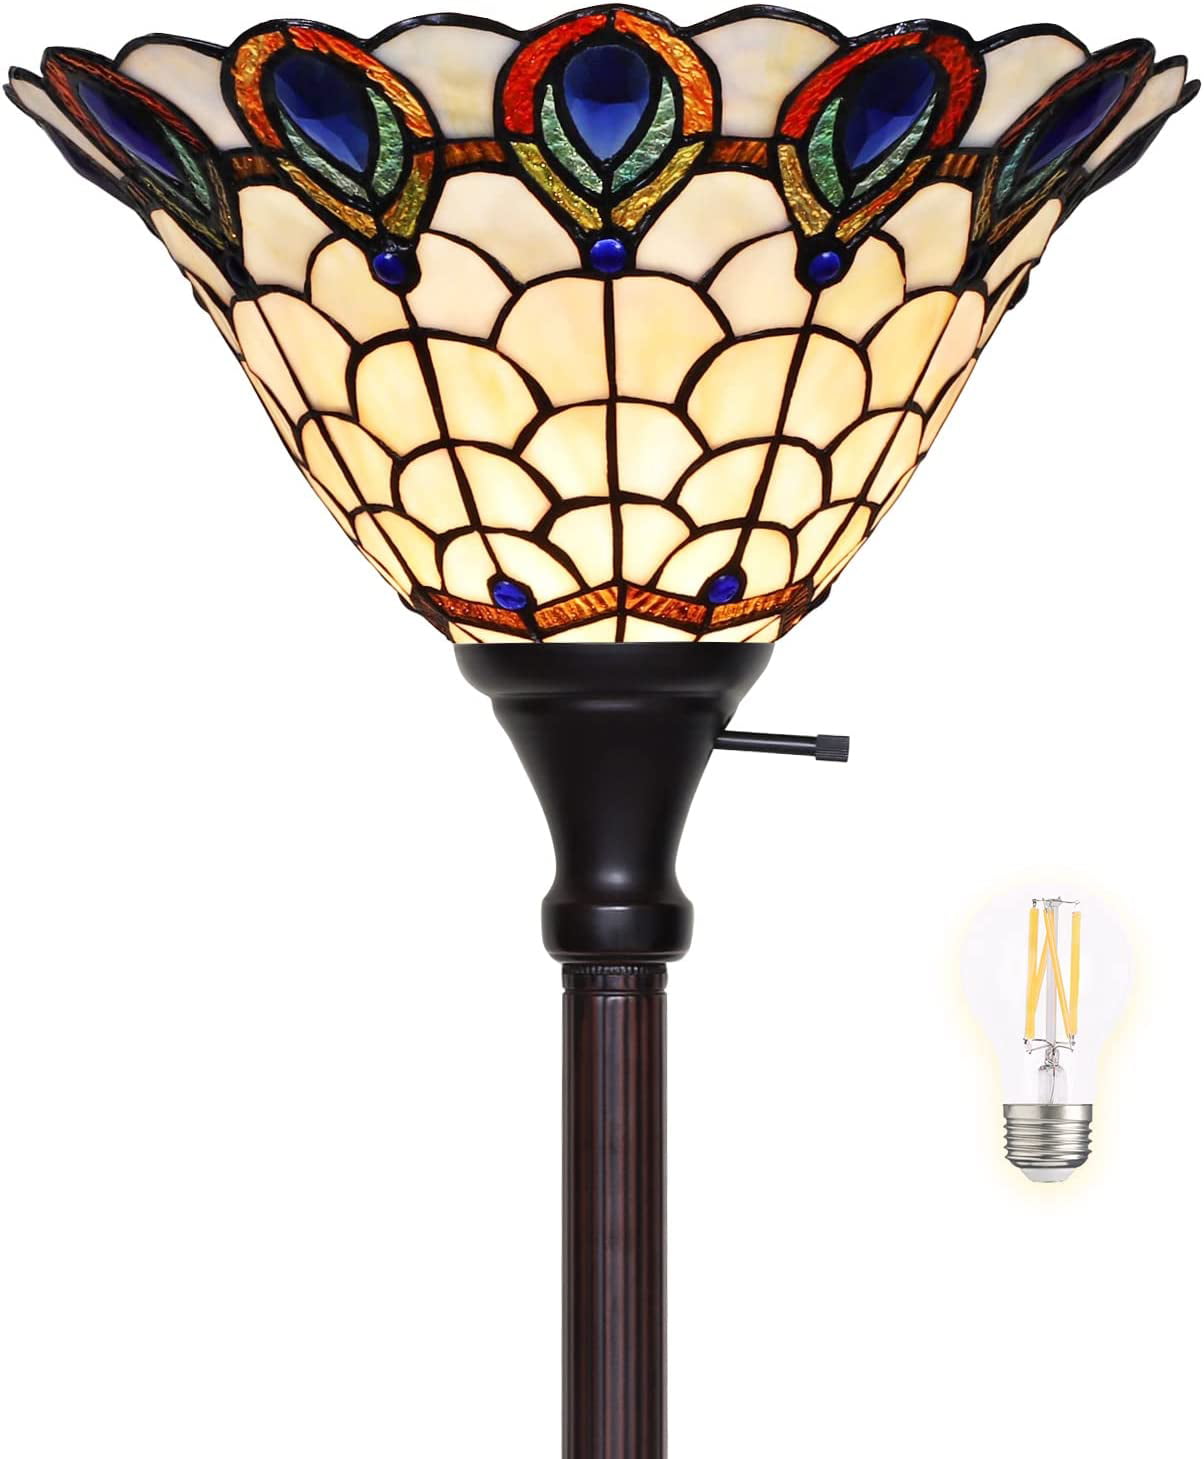 SHADY  Lamp Floor Lamp Stained Glass Peafowl Bedside Lamp Reading Desk Light for Bedroom Living Room 71\u201DTall 1 PCS LED Bulb(2700K E26) Included Unique Gifts